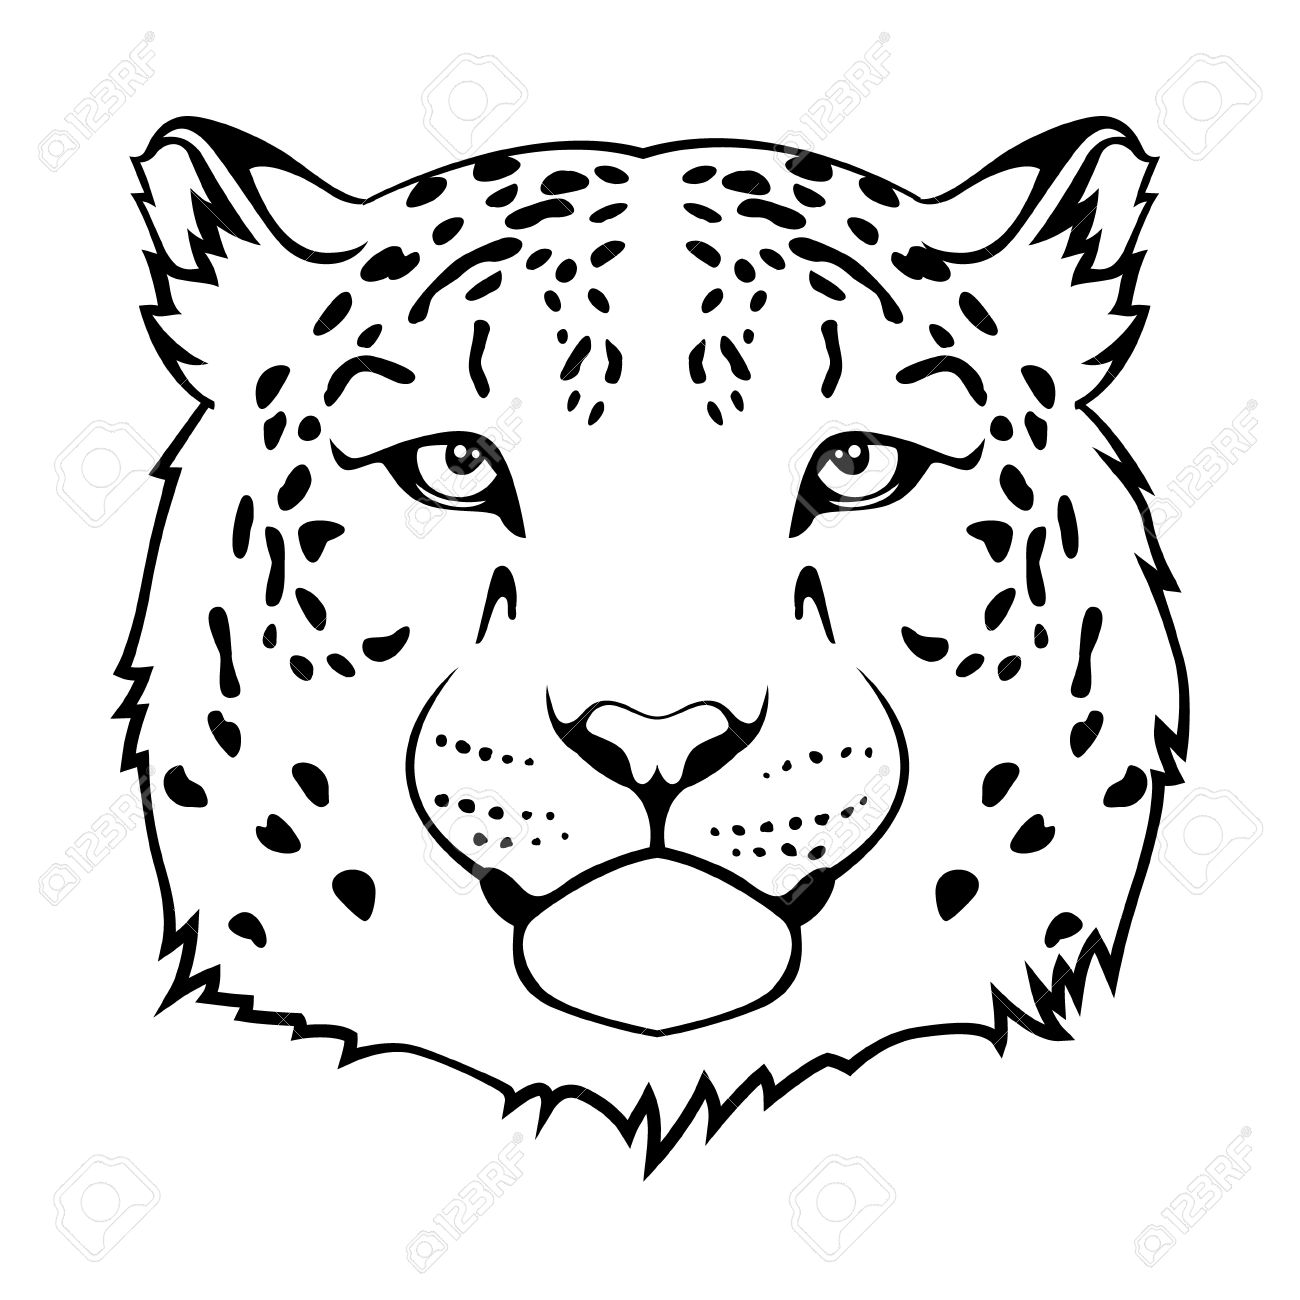 snow leopard: Snow leopard s head isolated on white Illustration